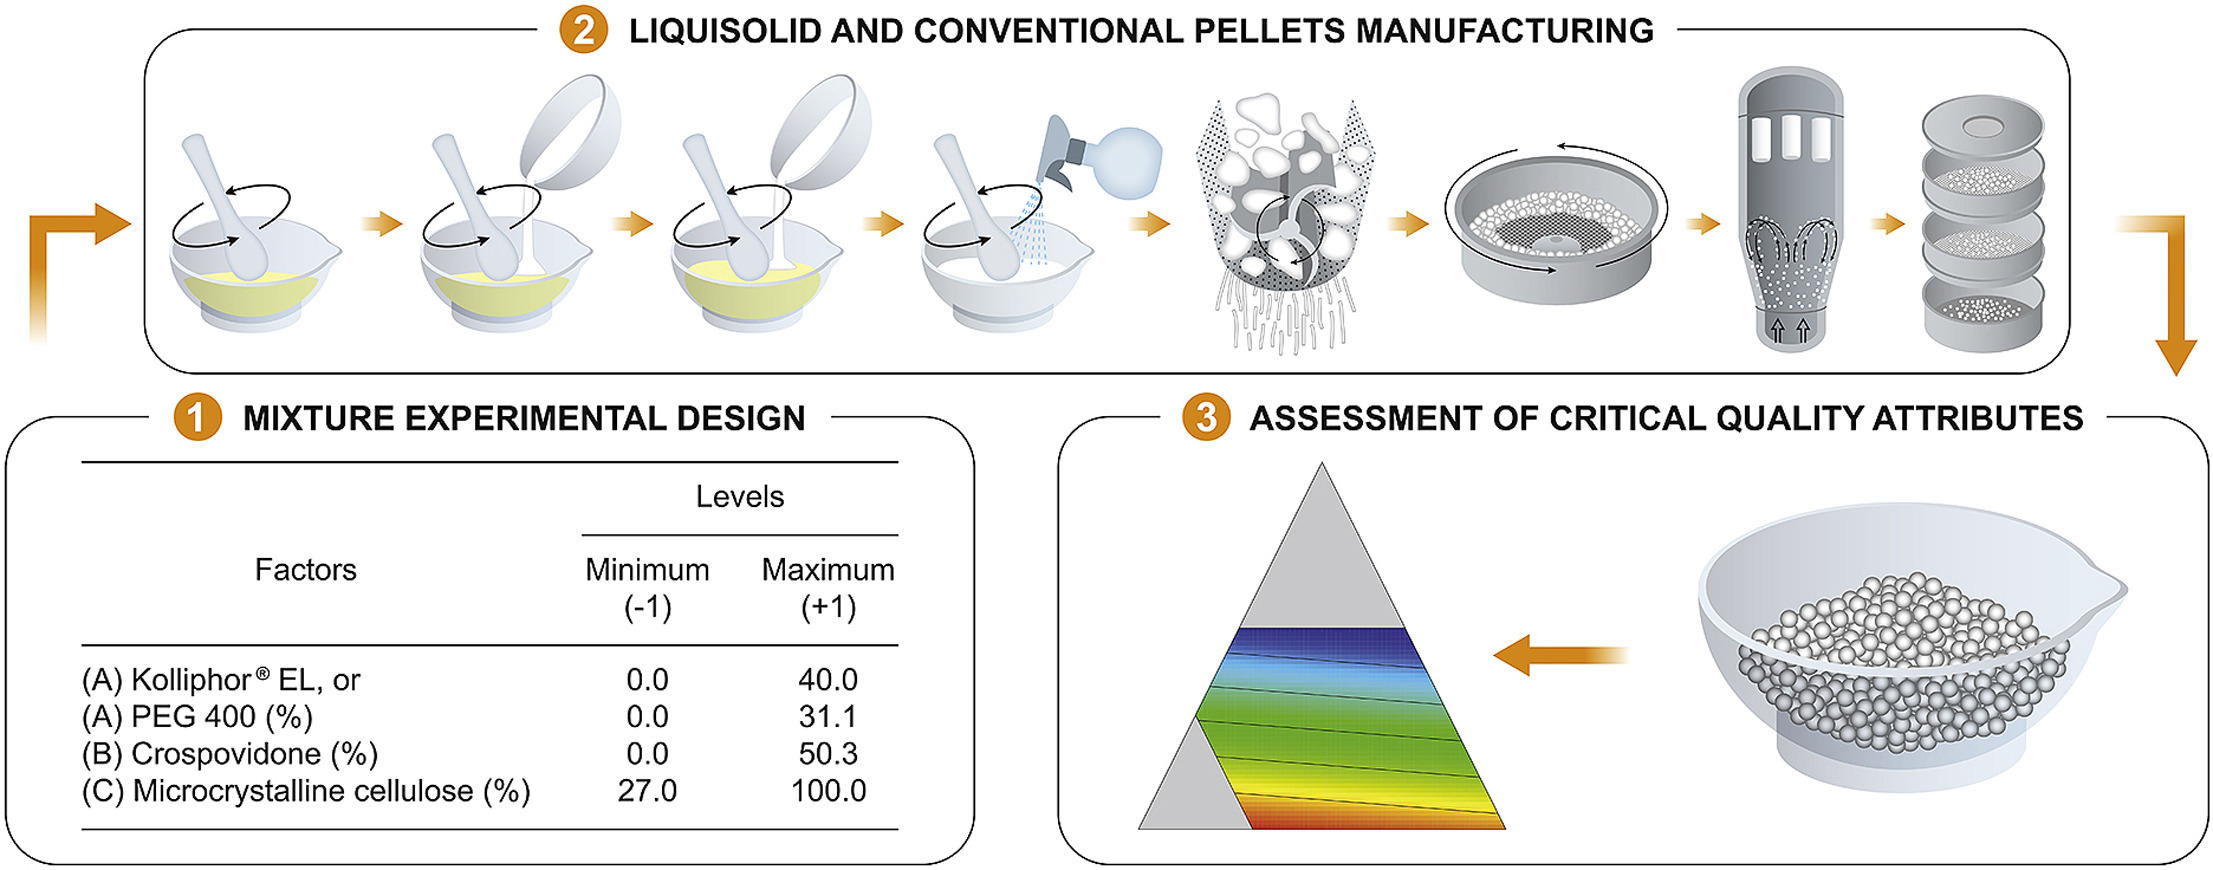 Liquisolid pellets: Mixture experimental design assessment of critical quality attributes influencing the manufacturing performance via extrusion-spheronization